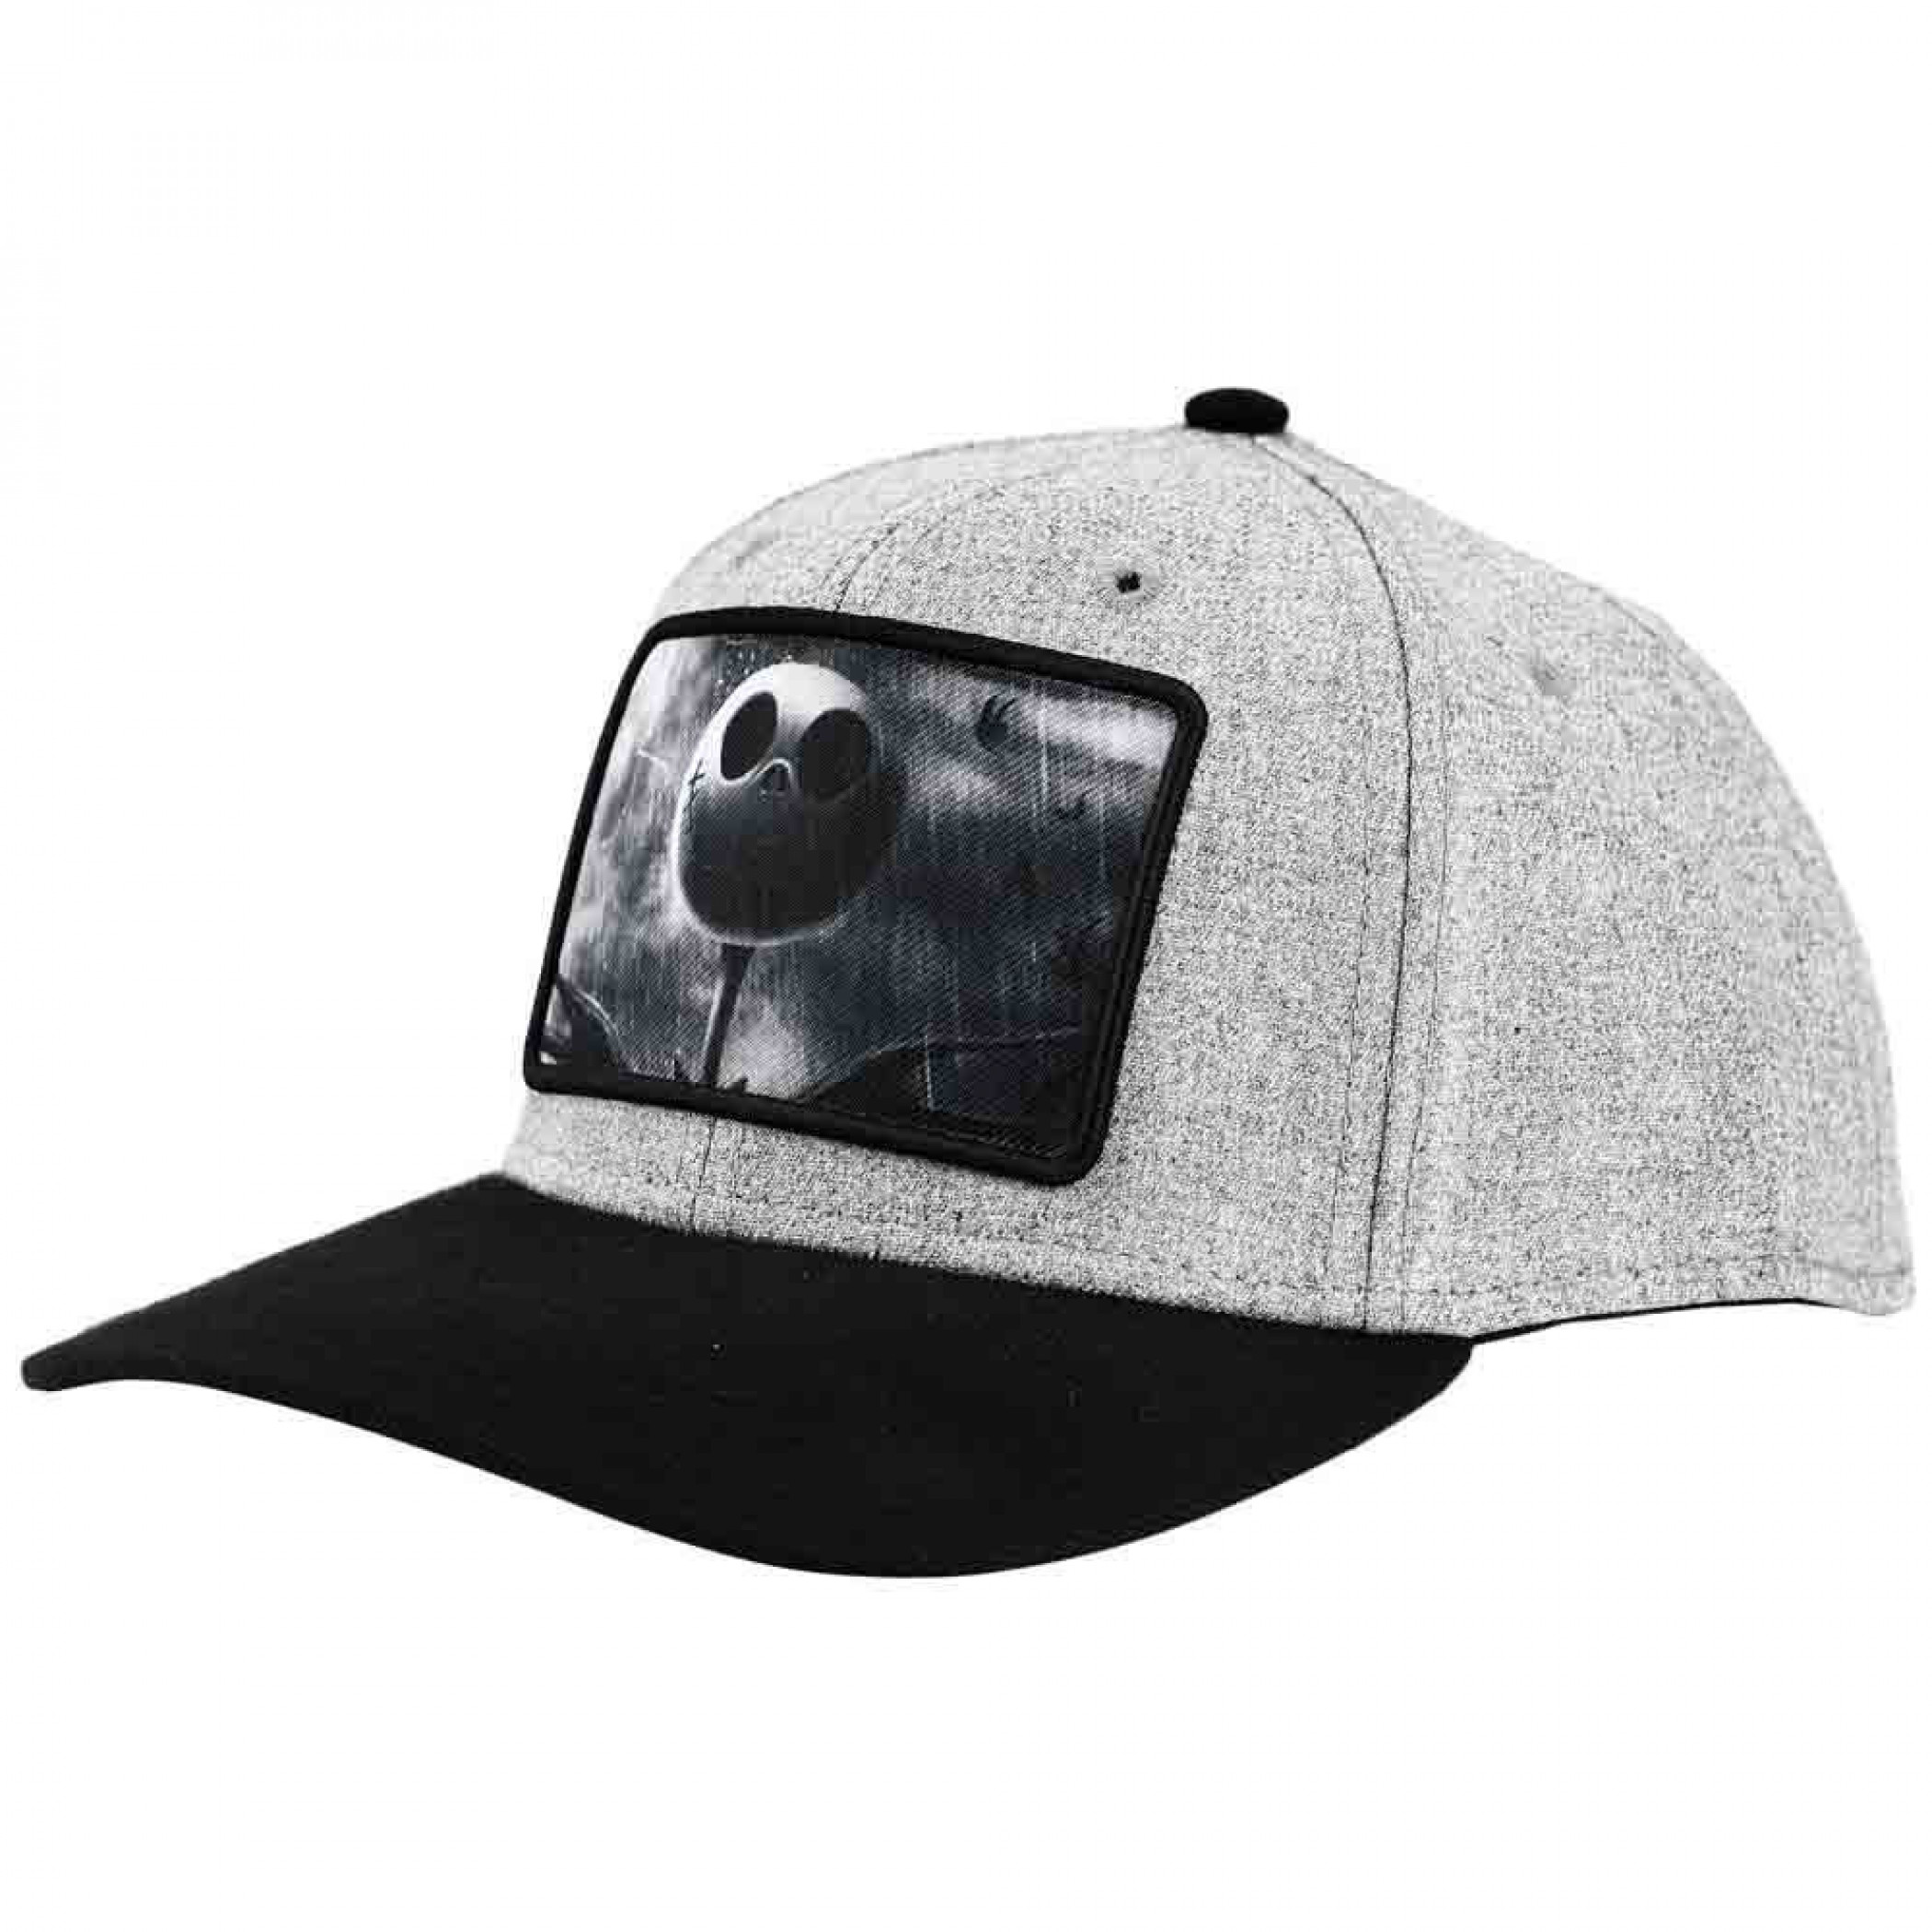 Nightmare Before Christmas Sublimated Patch Elite Flex Snapback Hat